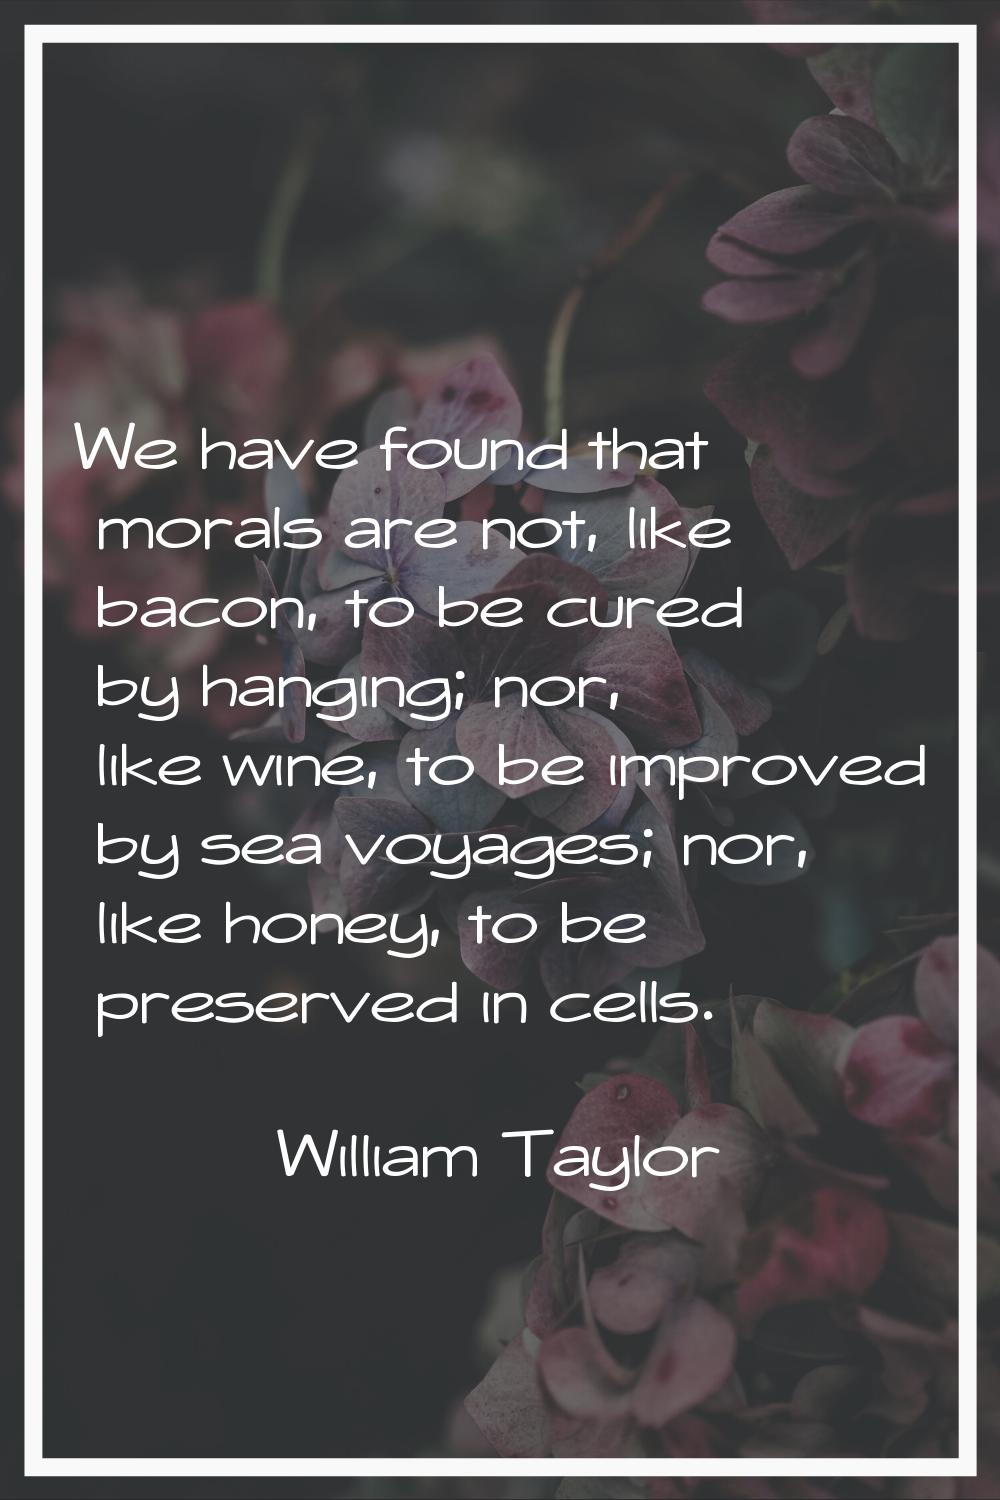 We have found that morals are not, like bacon, to be cured by hanging; nor, like wine, to be improv